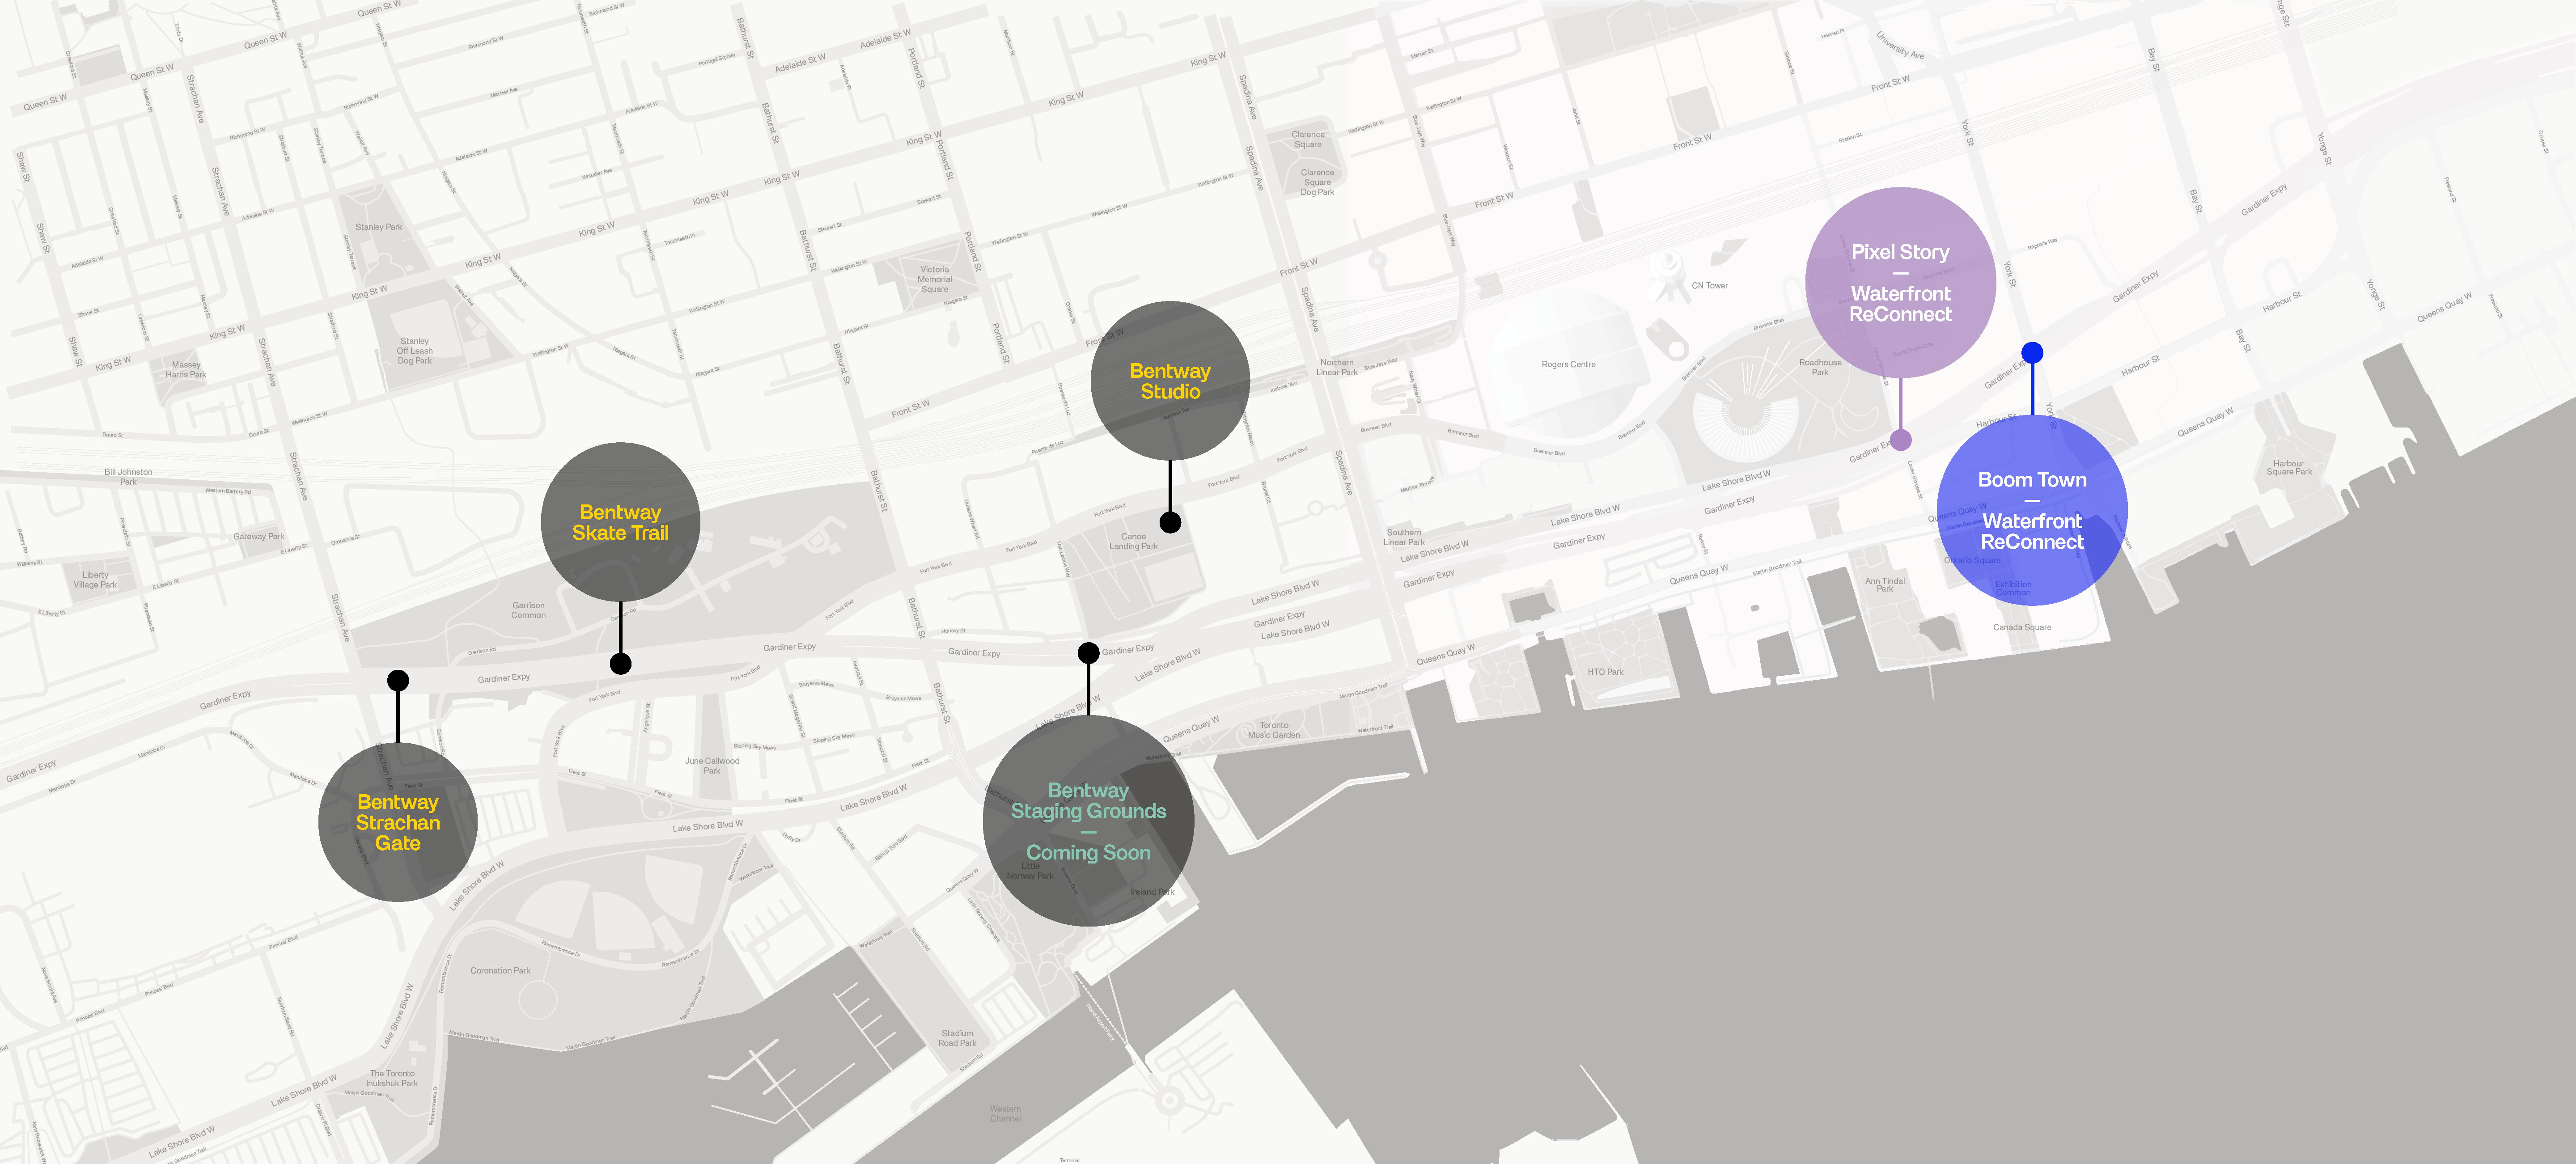 Bentway Staging Grounds, noted in context of other Bentway sites and projects, including Waterfront ReConnect.